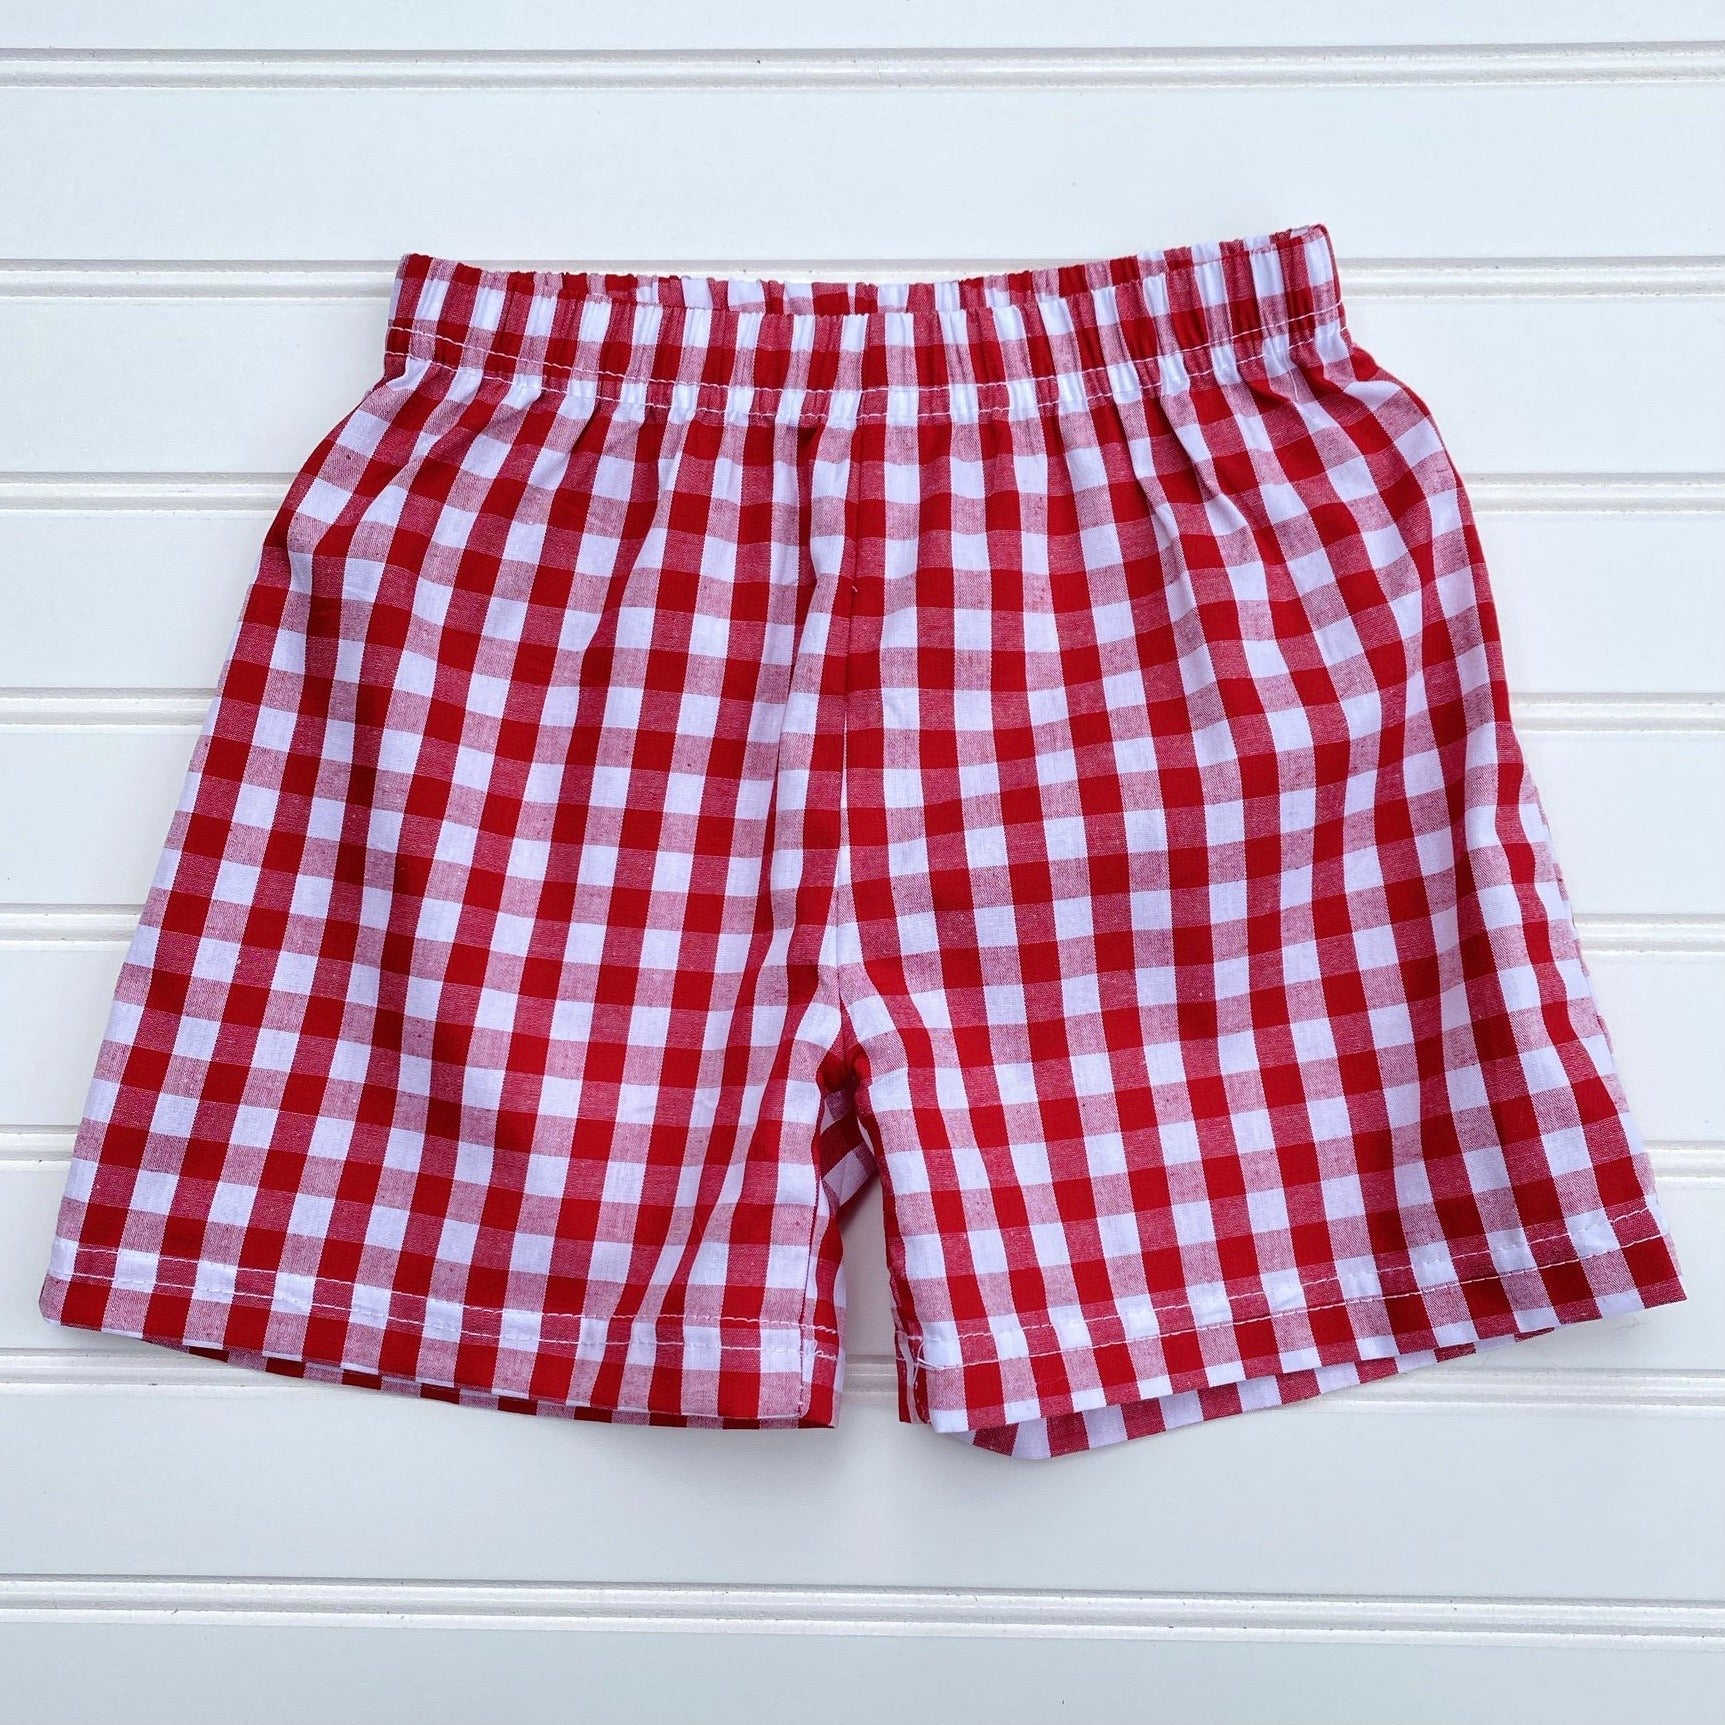 Boys Shorts - Red Large Check - Smocked South